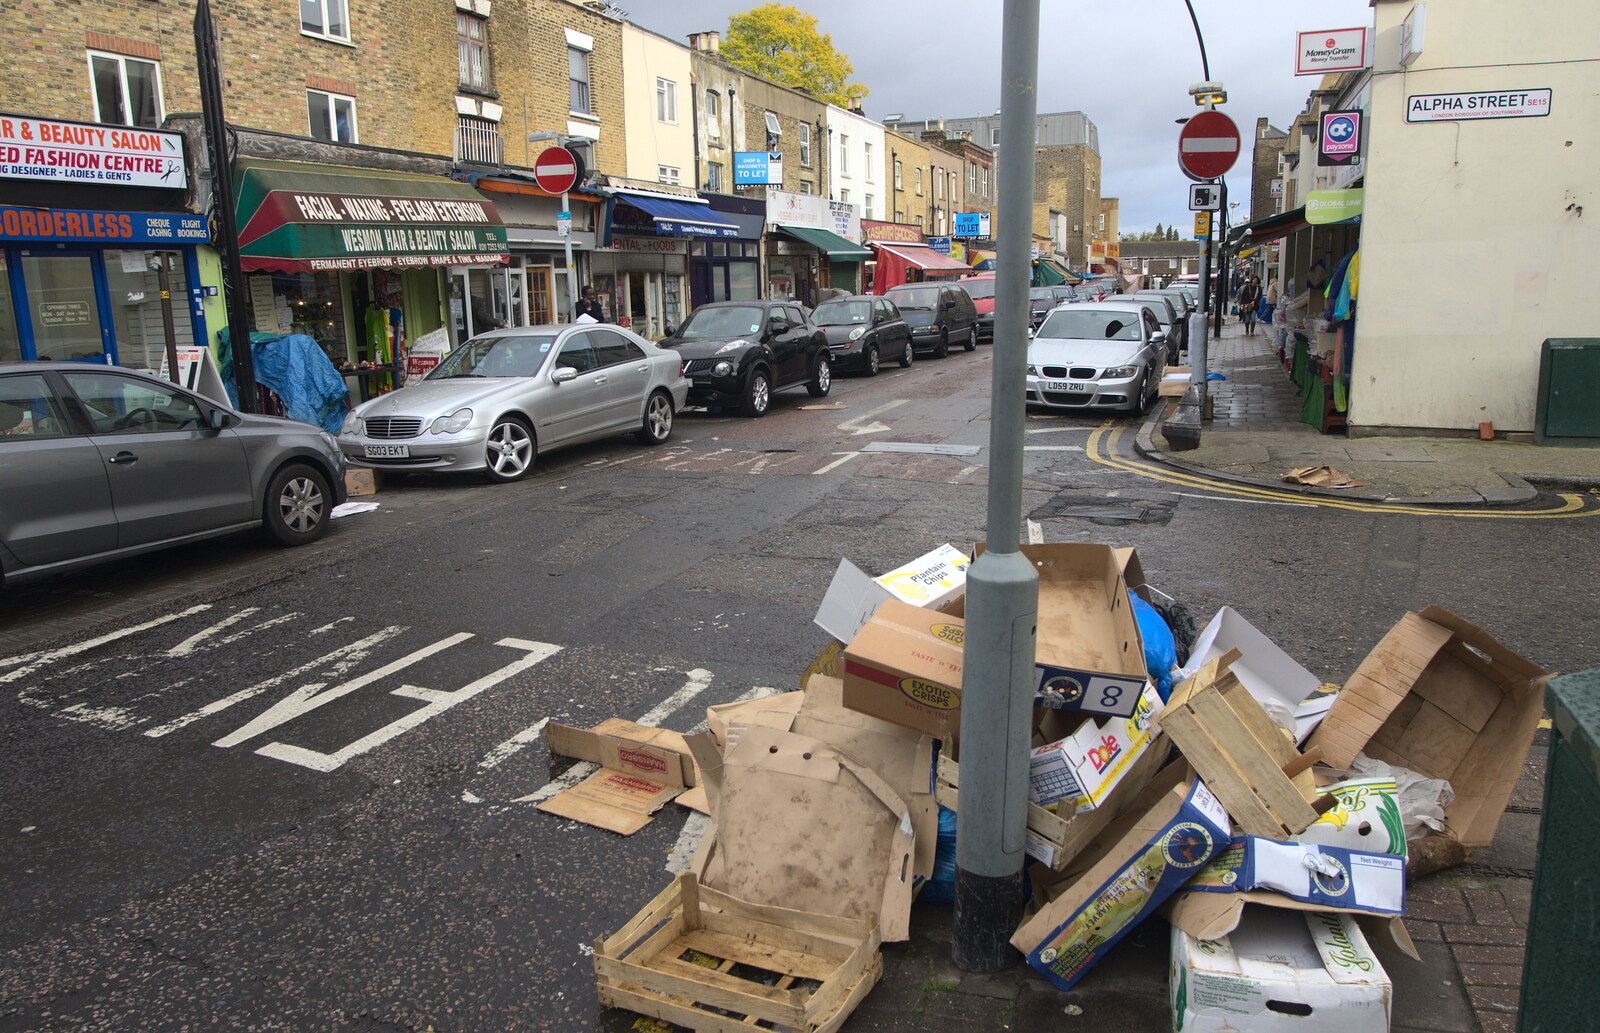 Piles of discarded cardboard boxes, Peckham from Another Trip to Peckham, Southwark, London - 28th October 2012